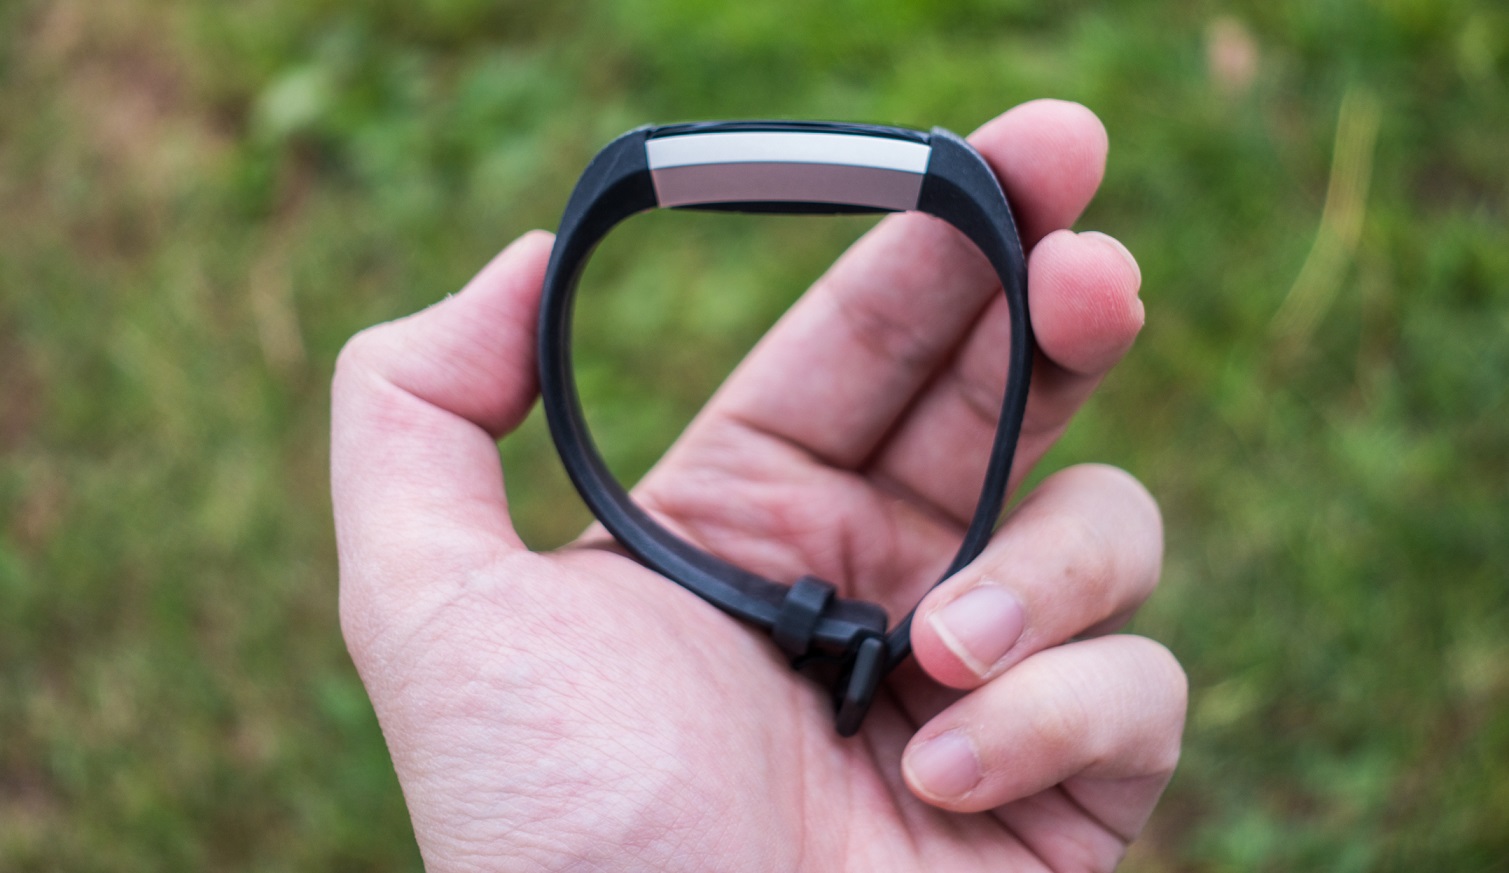 Stay fit in style with the Fitbit Alta HR